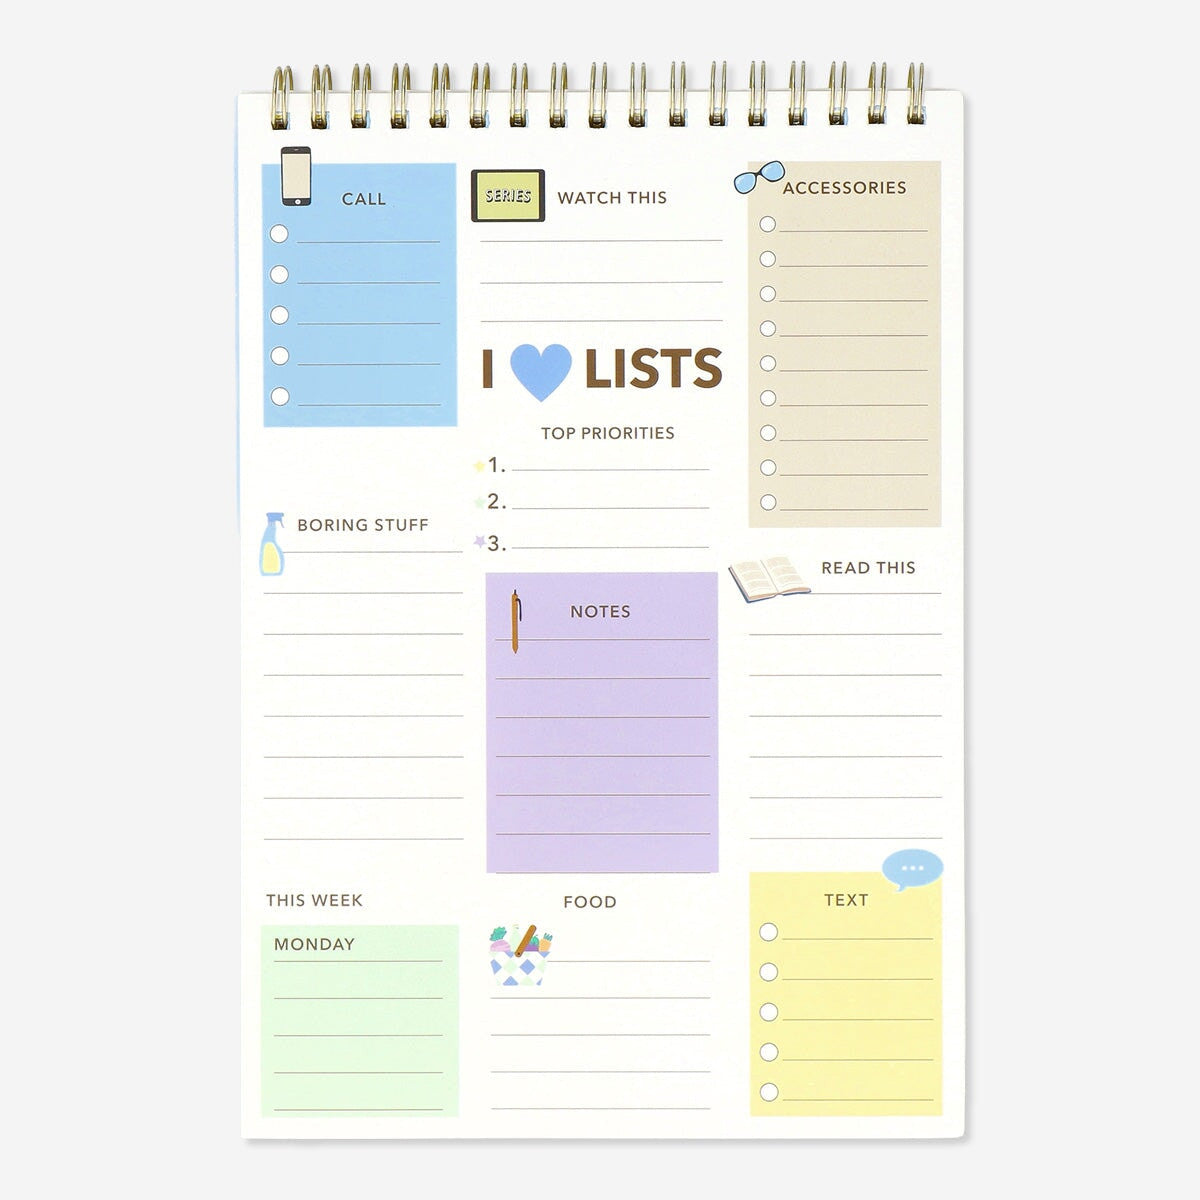 Image of Notepad with to-do lists